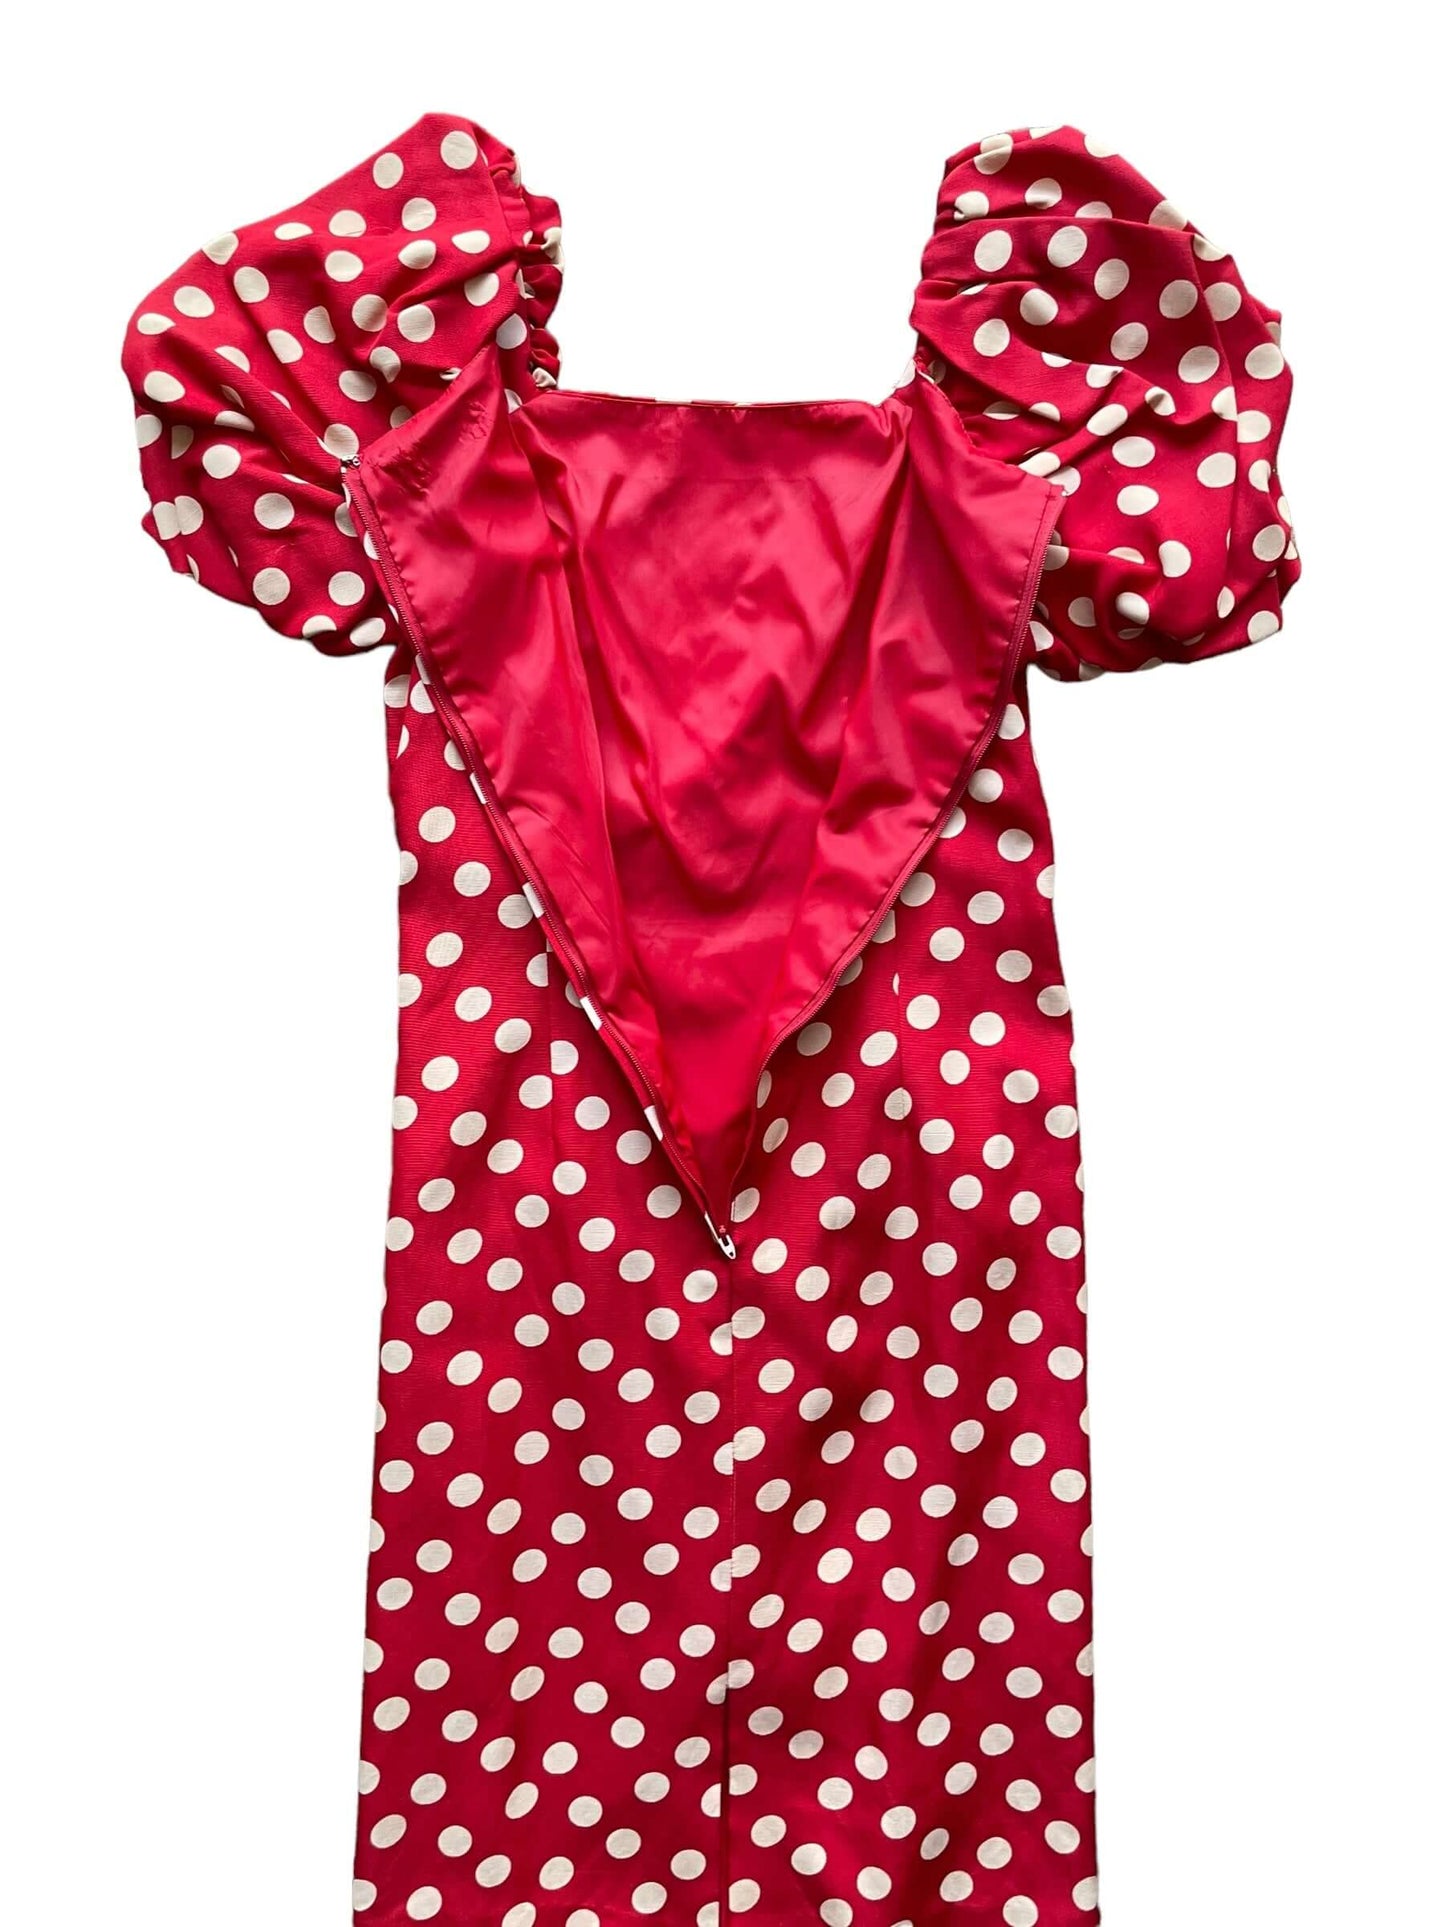 Open back view of 1980s Poofy Red Polka Dot Wiggle Dress M-L